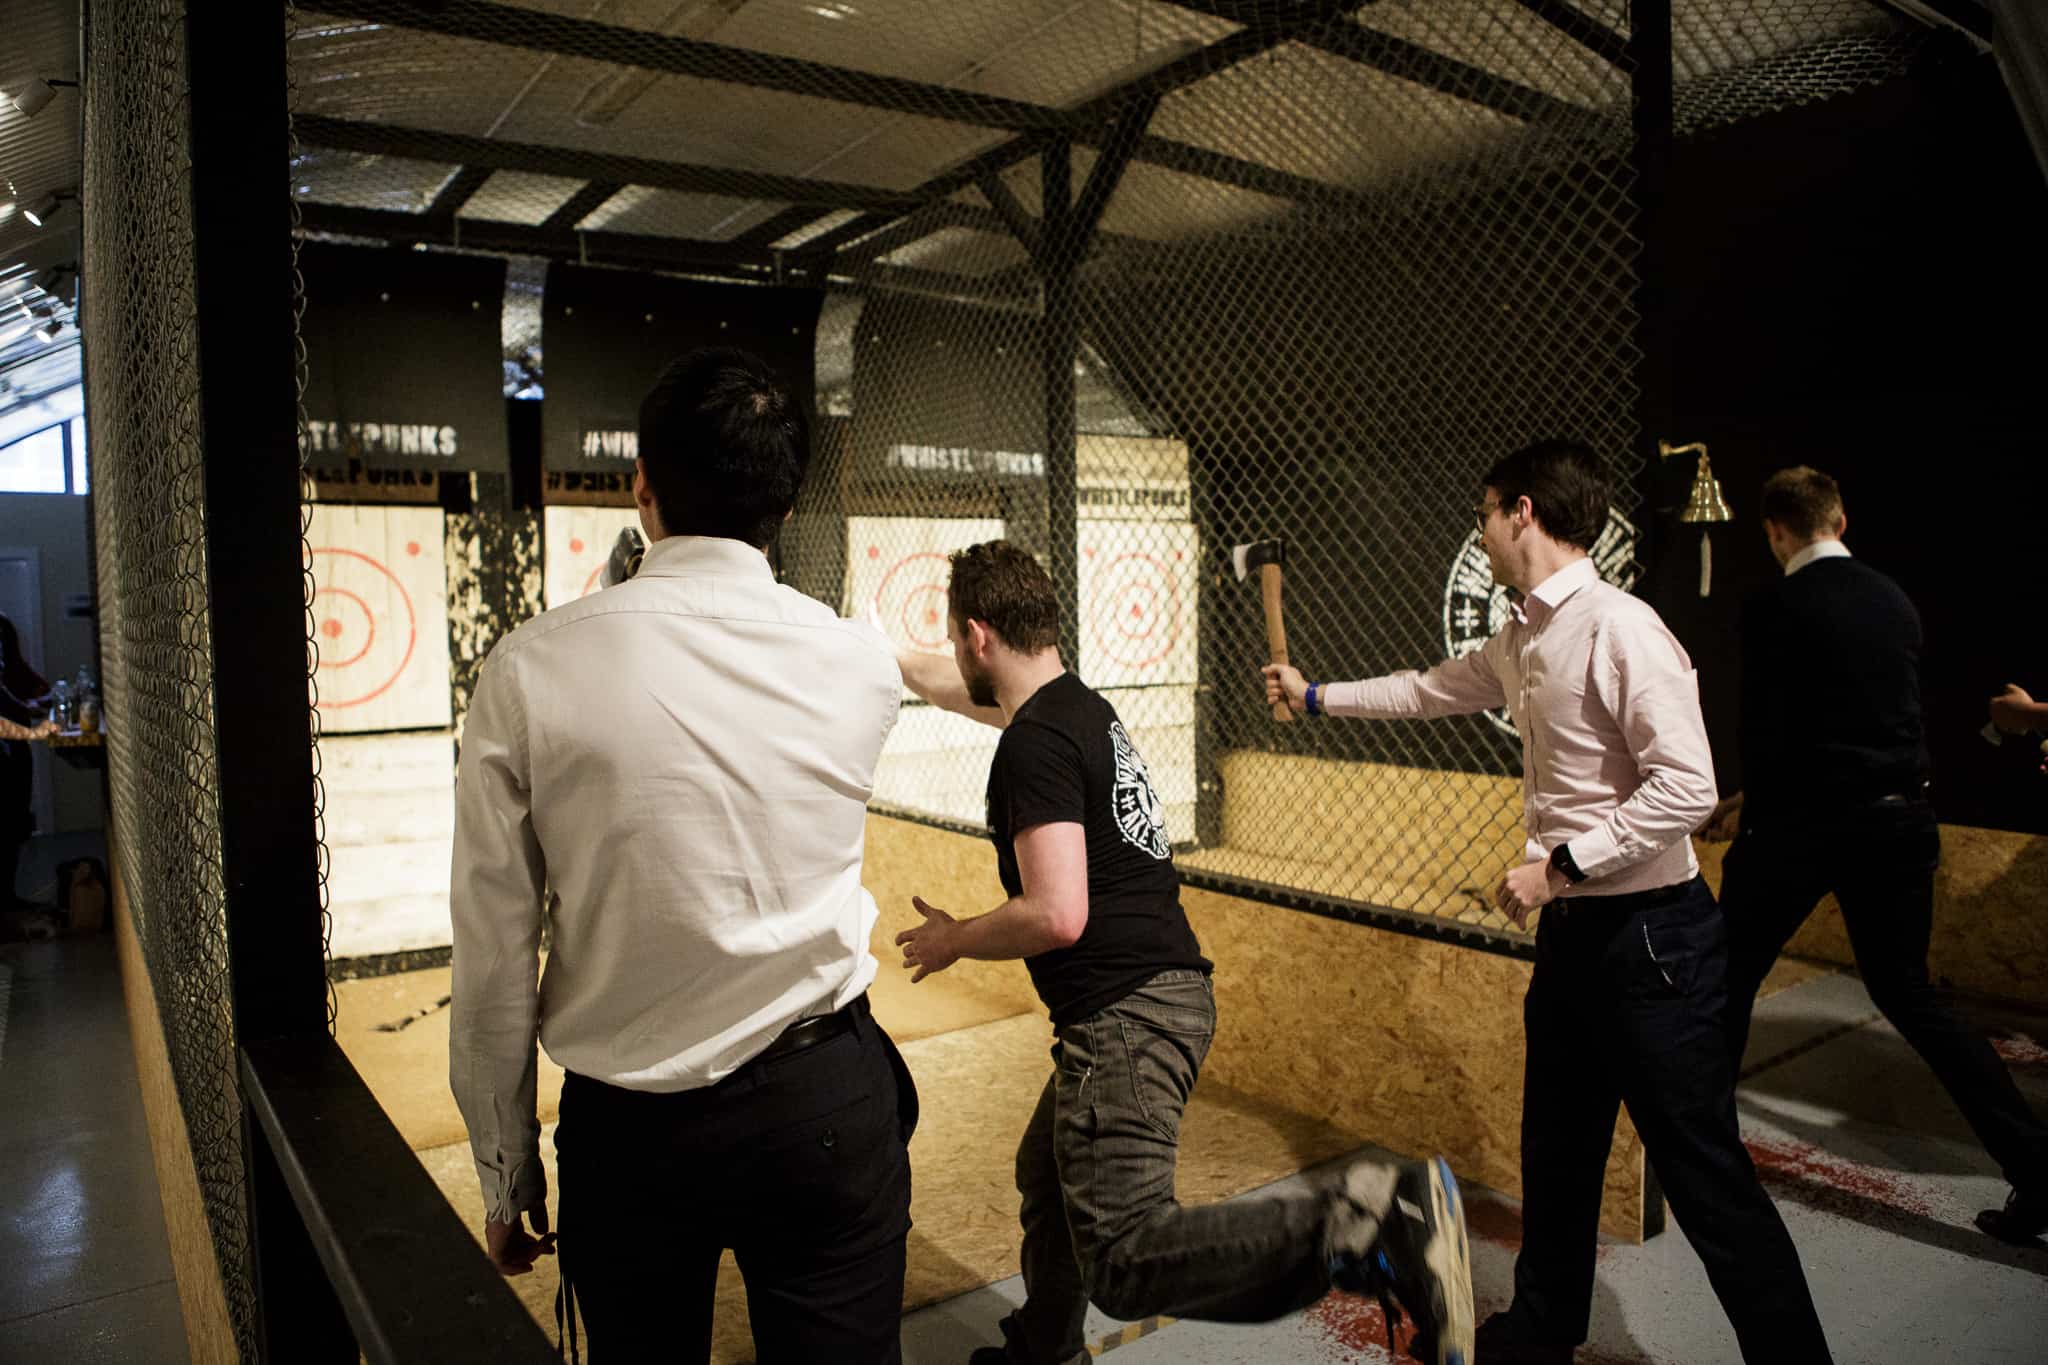 men in business clothes throwing axes